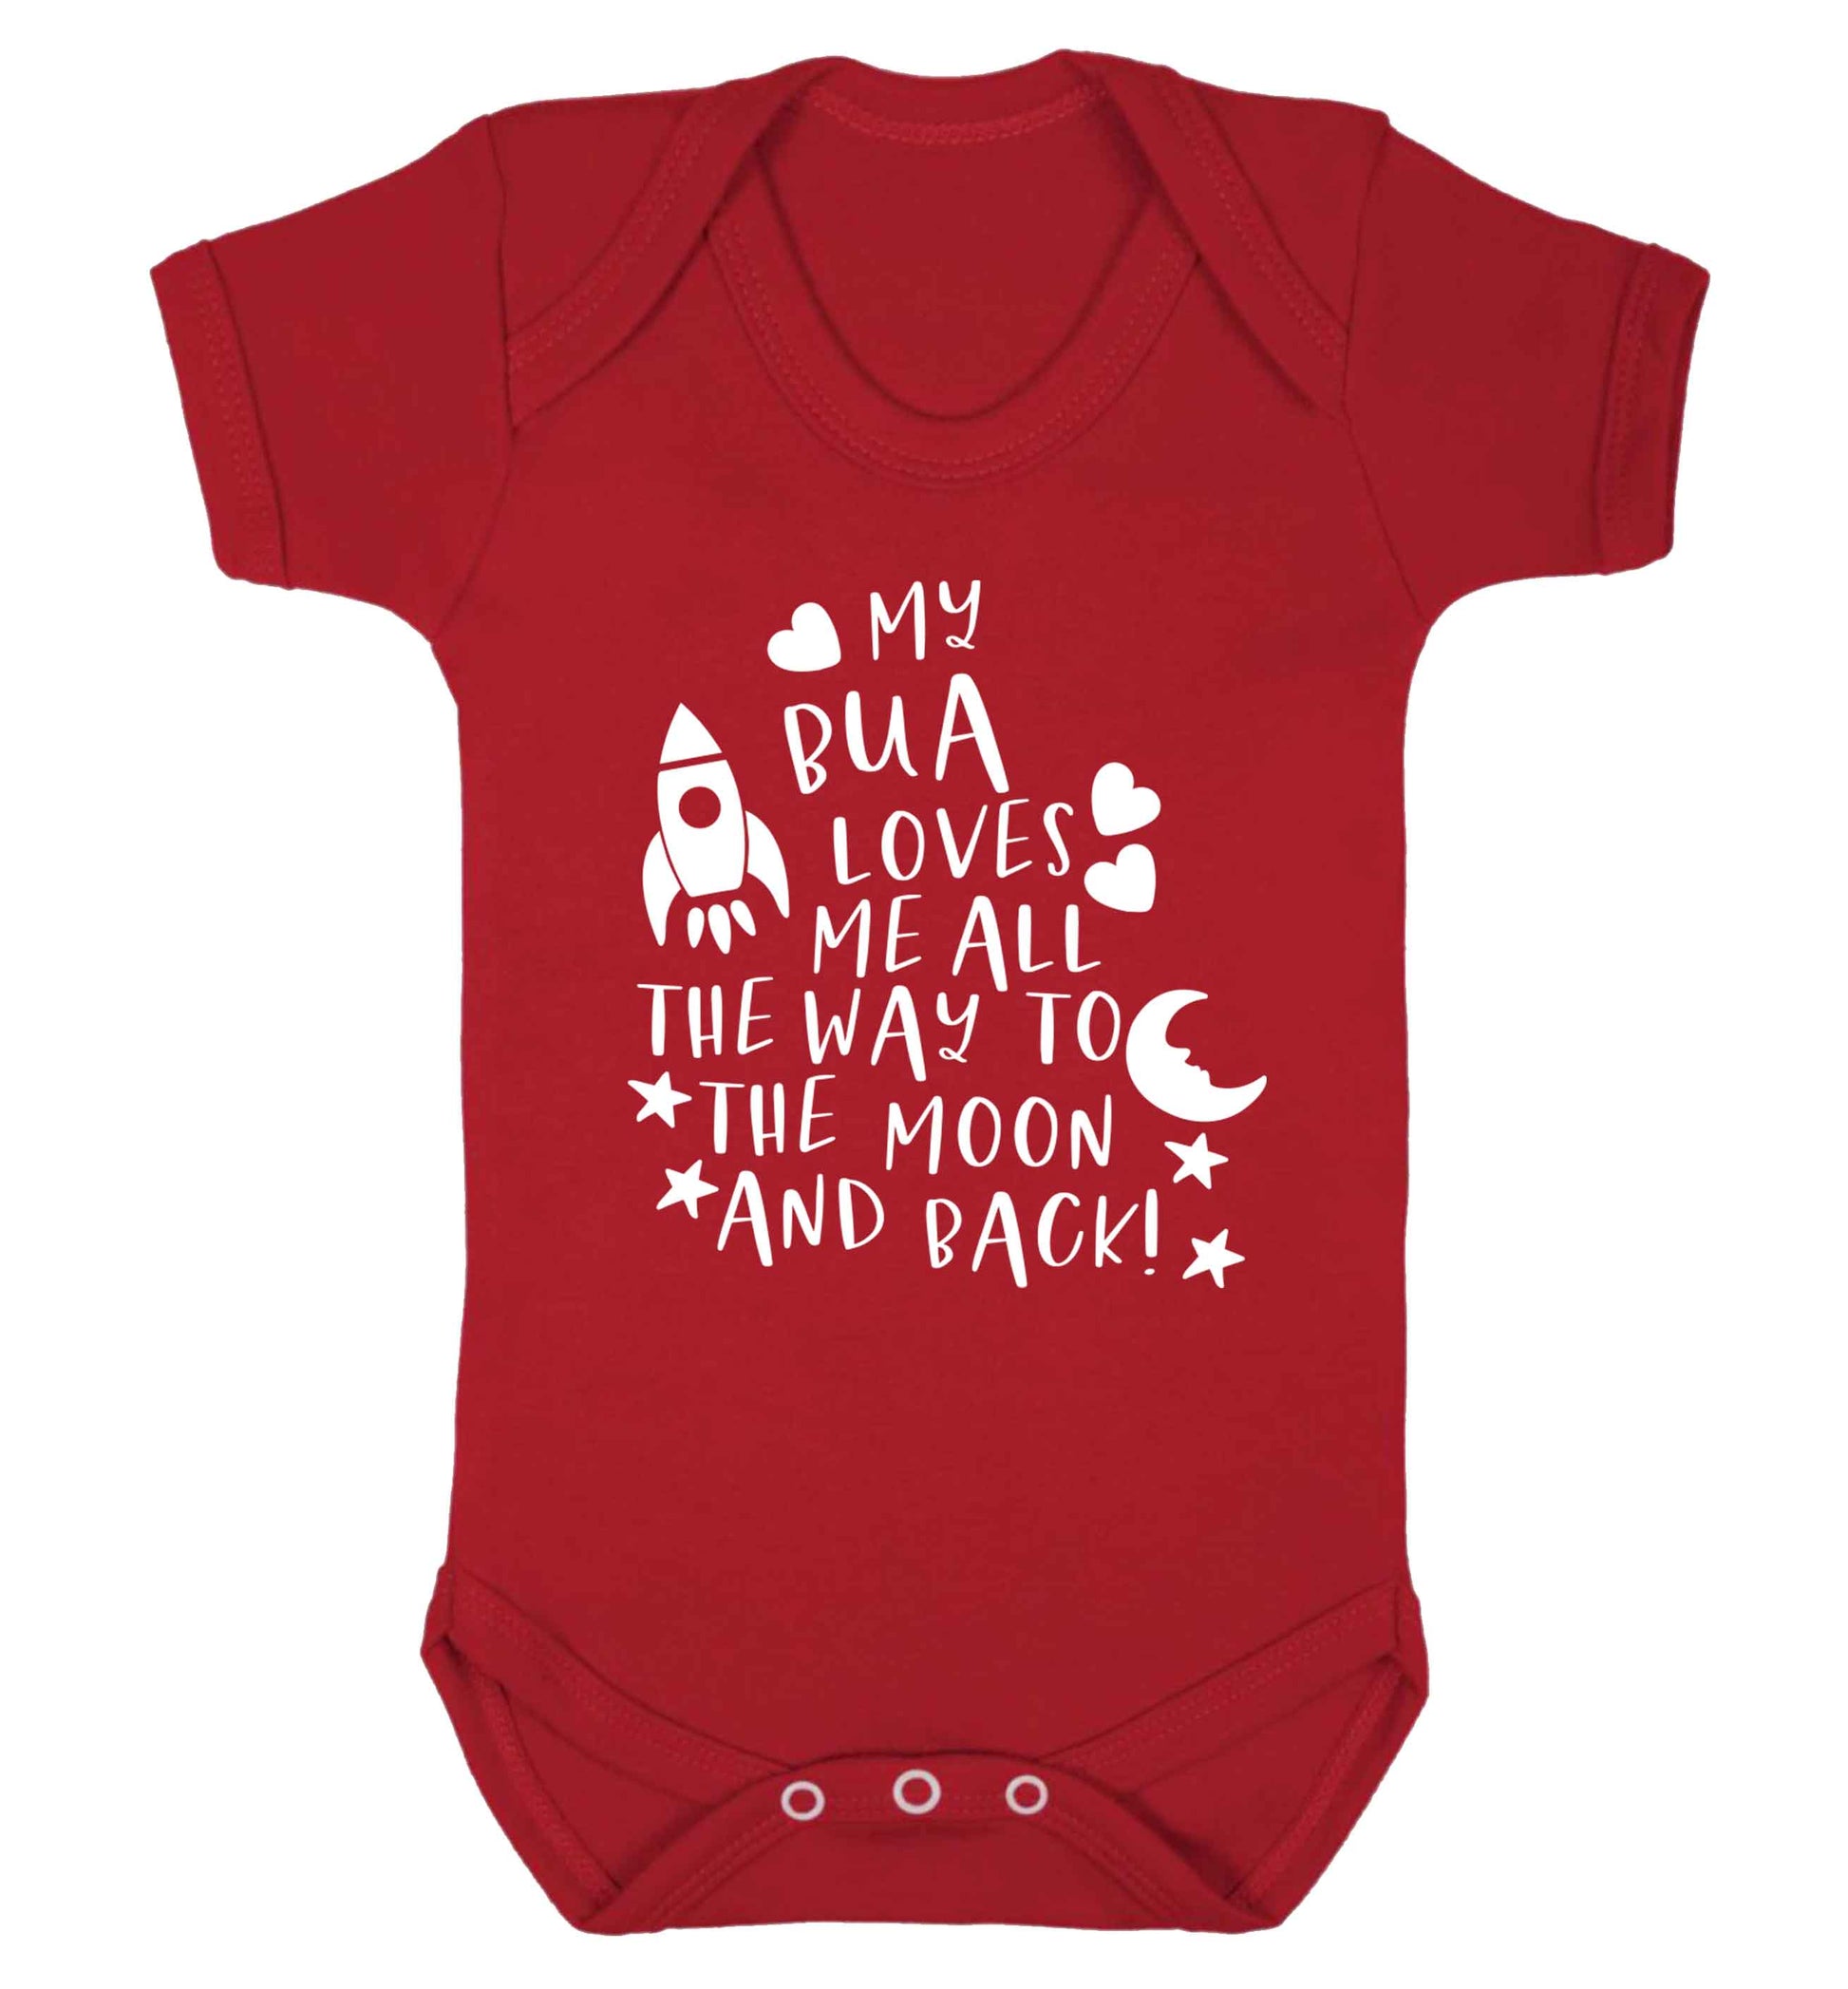 My bua loves me all they way to the moon and back Baby Vest red 18-24 months